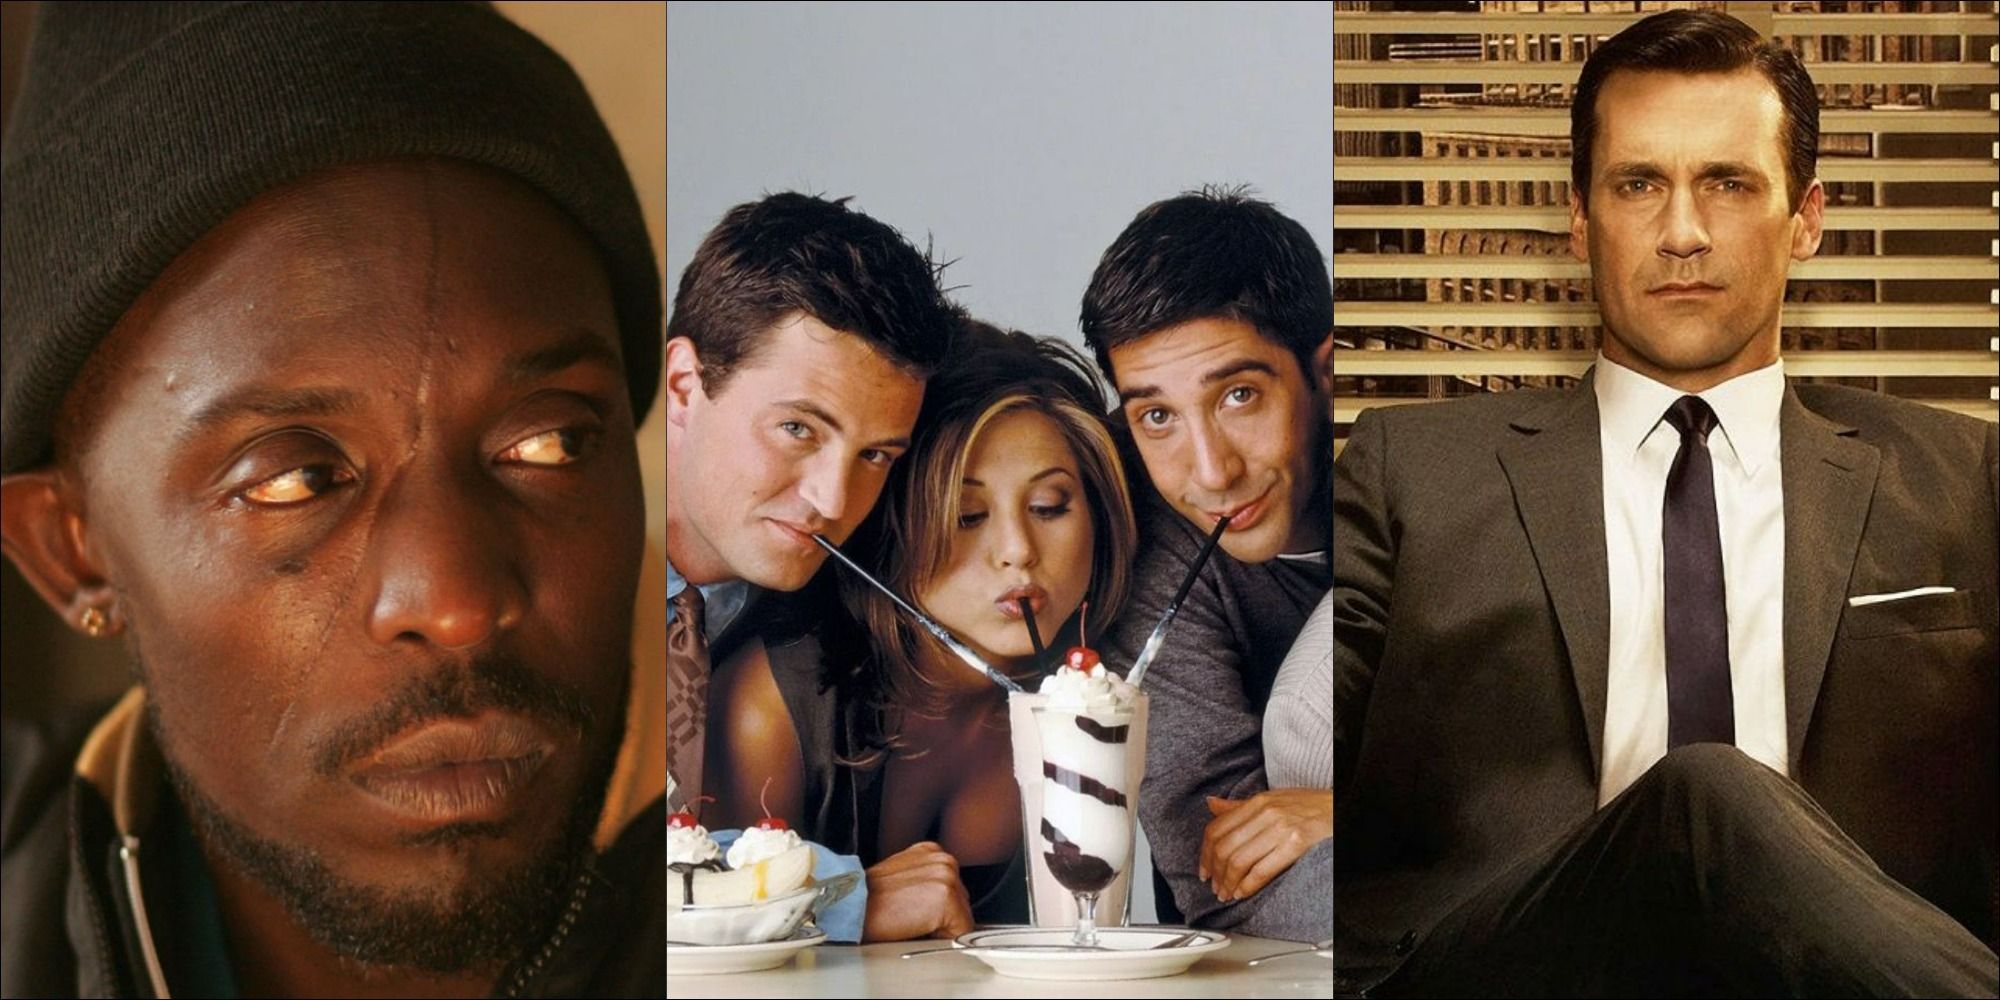 Characters from The Wire, Friends, and Mad Men